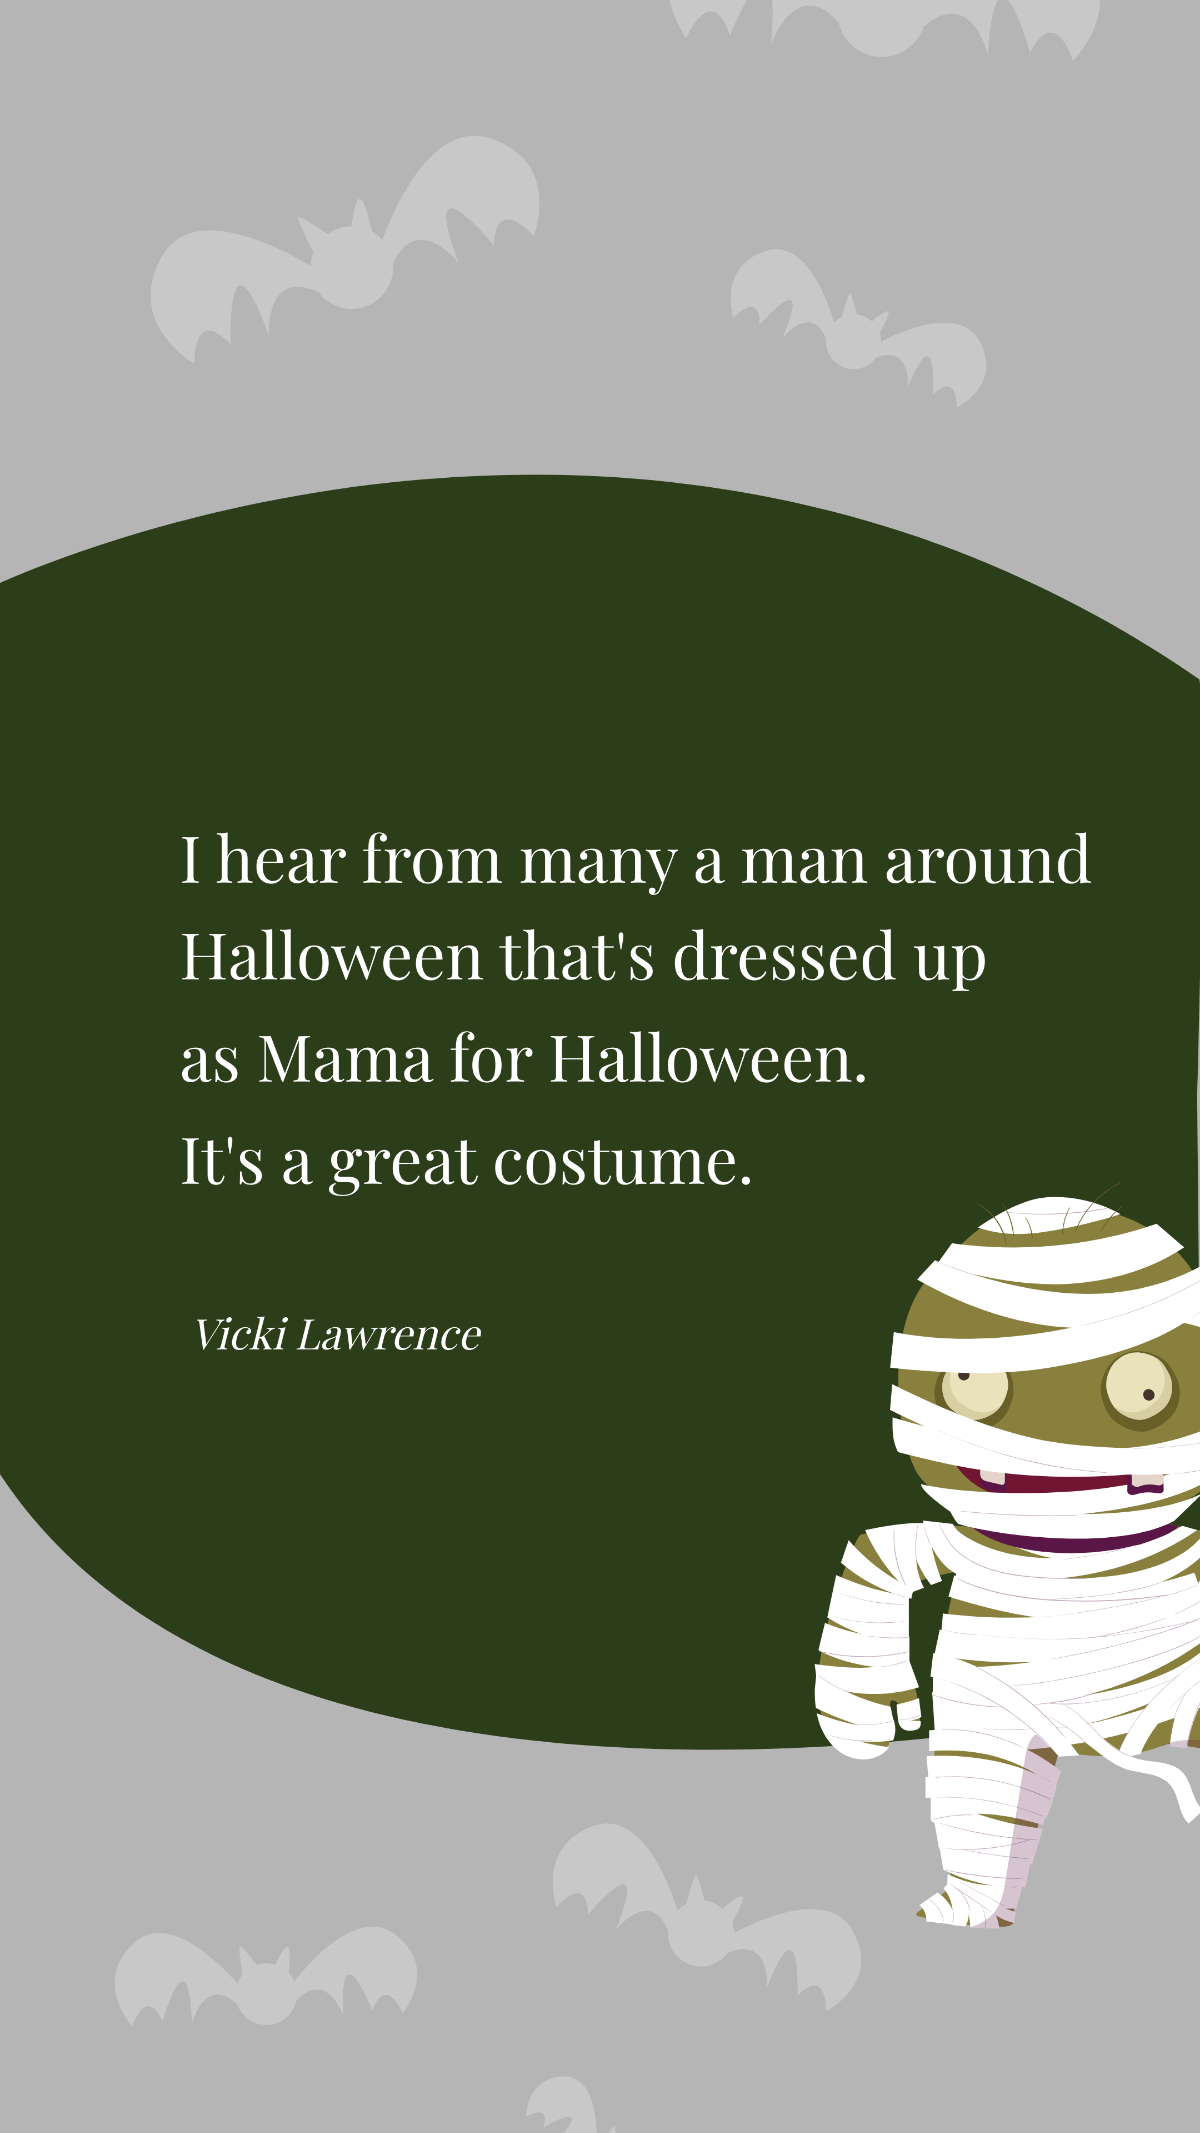 Vicki Lawrence- I hear from many a man around Halloween that's dressed up as Mama for Halloween. It's a great costume.  Template